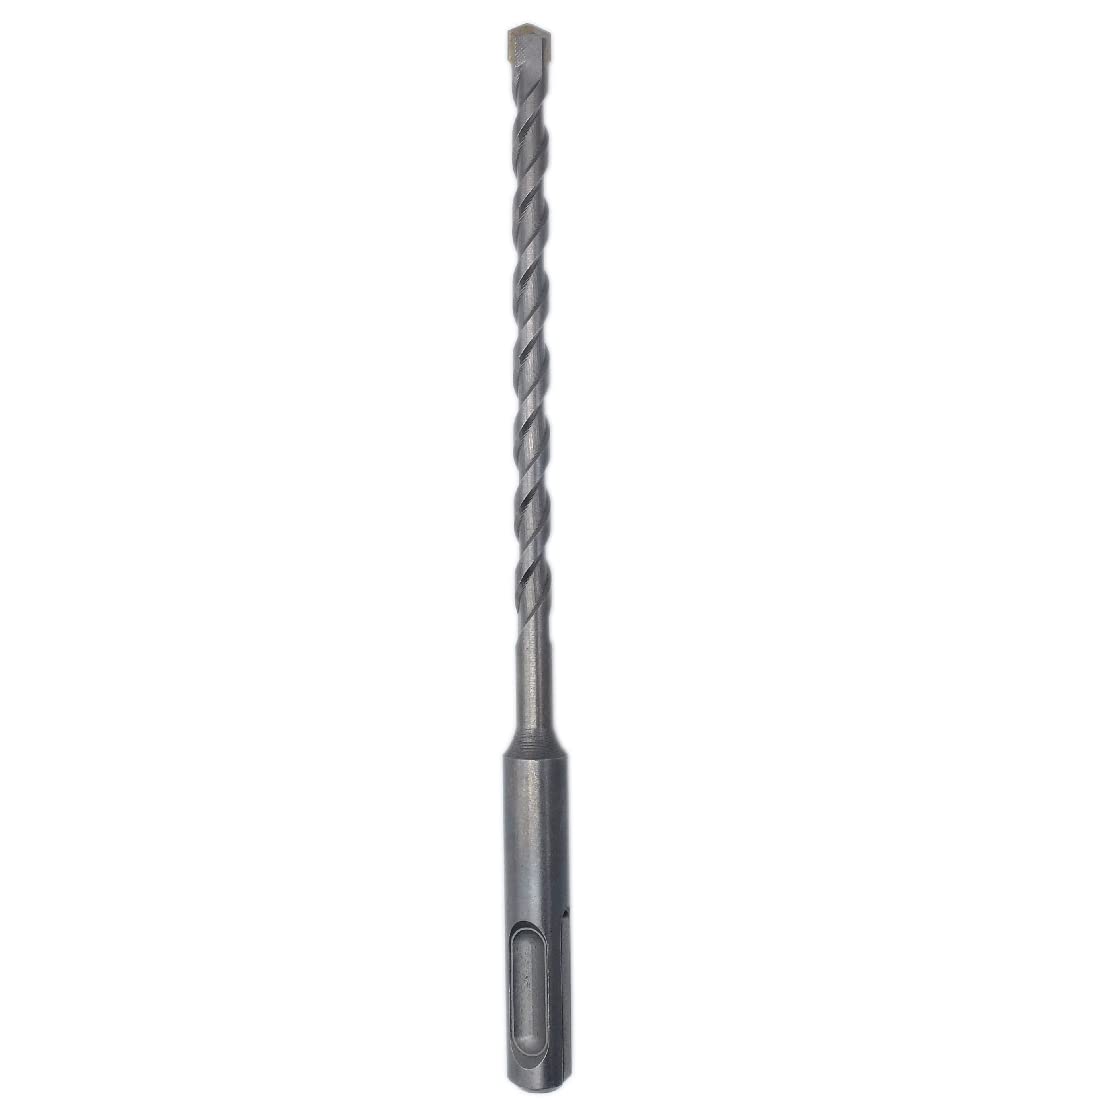 1/4-Inch Carbide-Tipped SDS-Plus Rotary Hammer Drill Bit for Concrete, Brick, Stone, Pack of 6